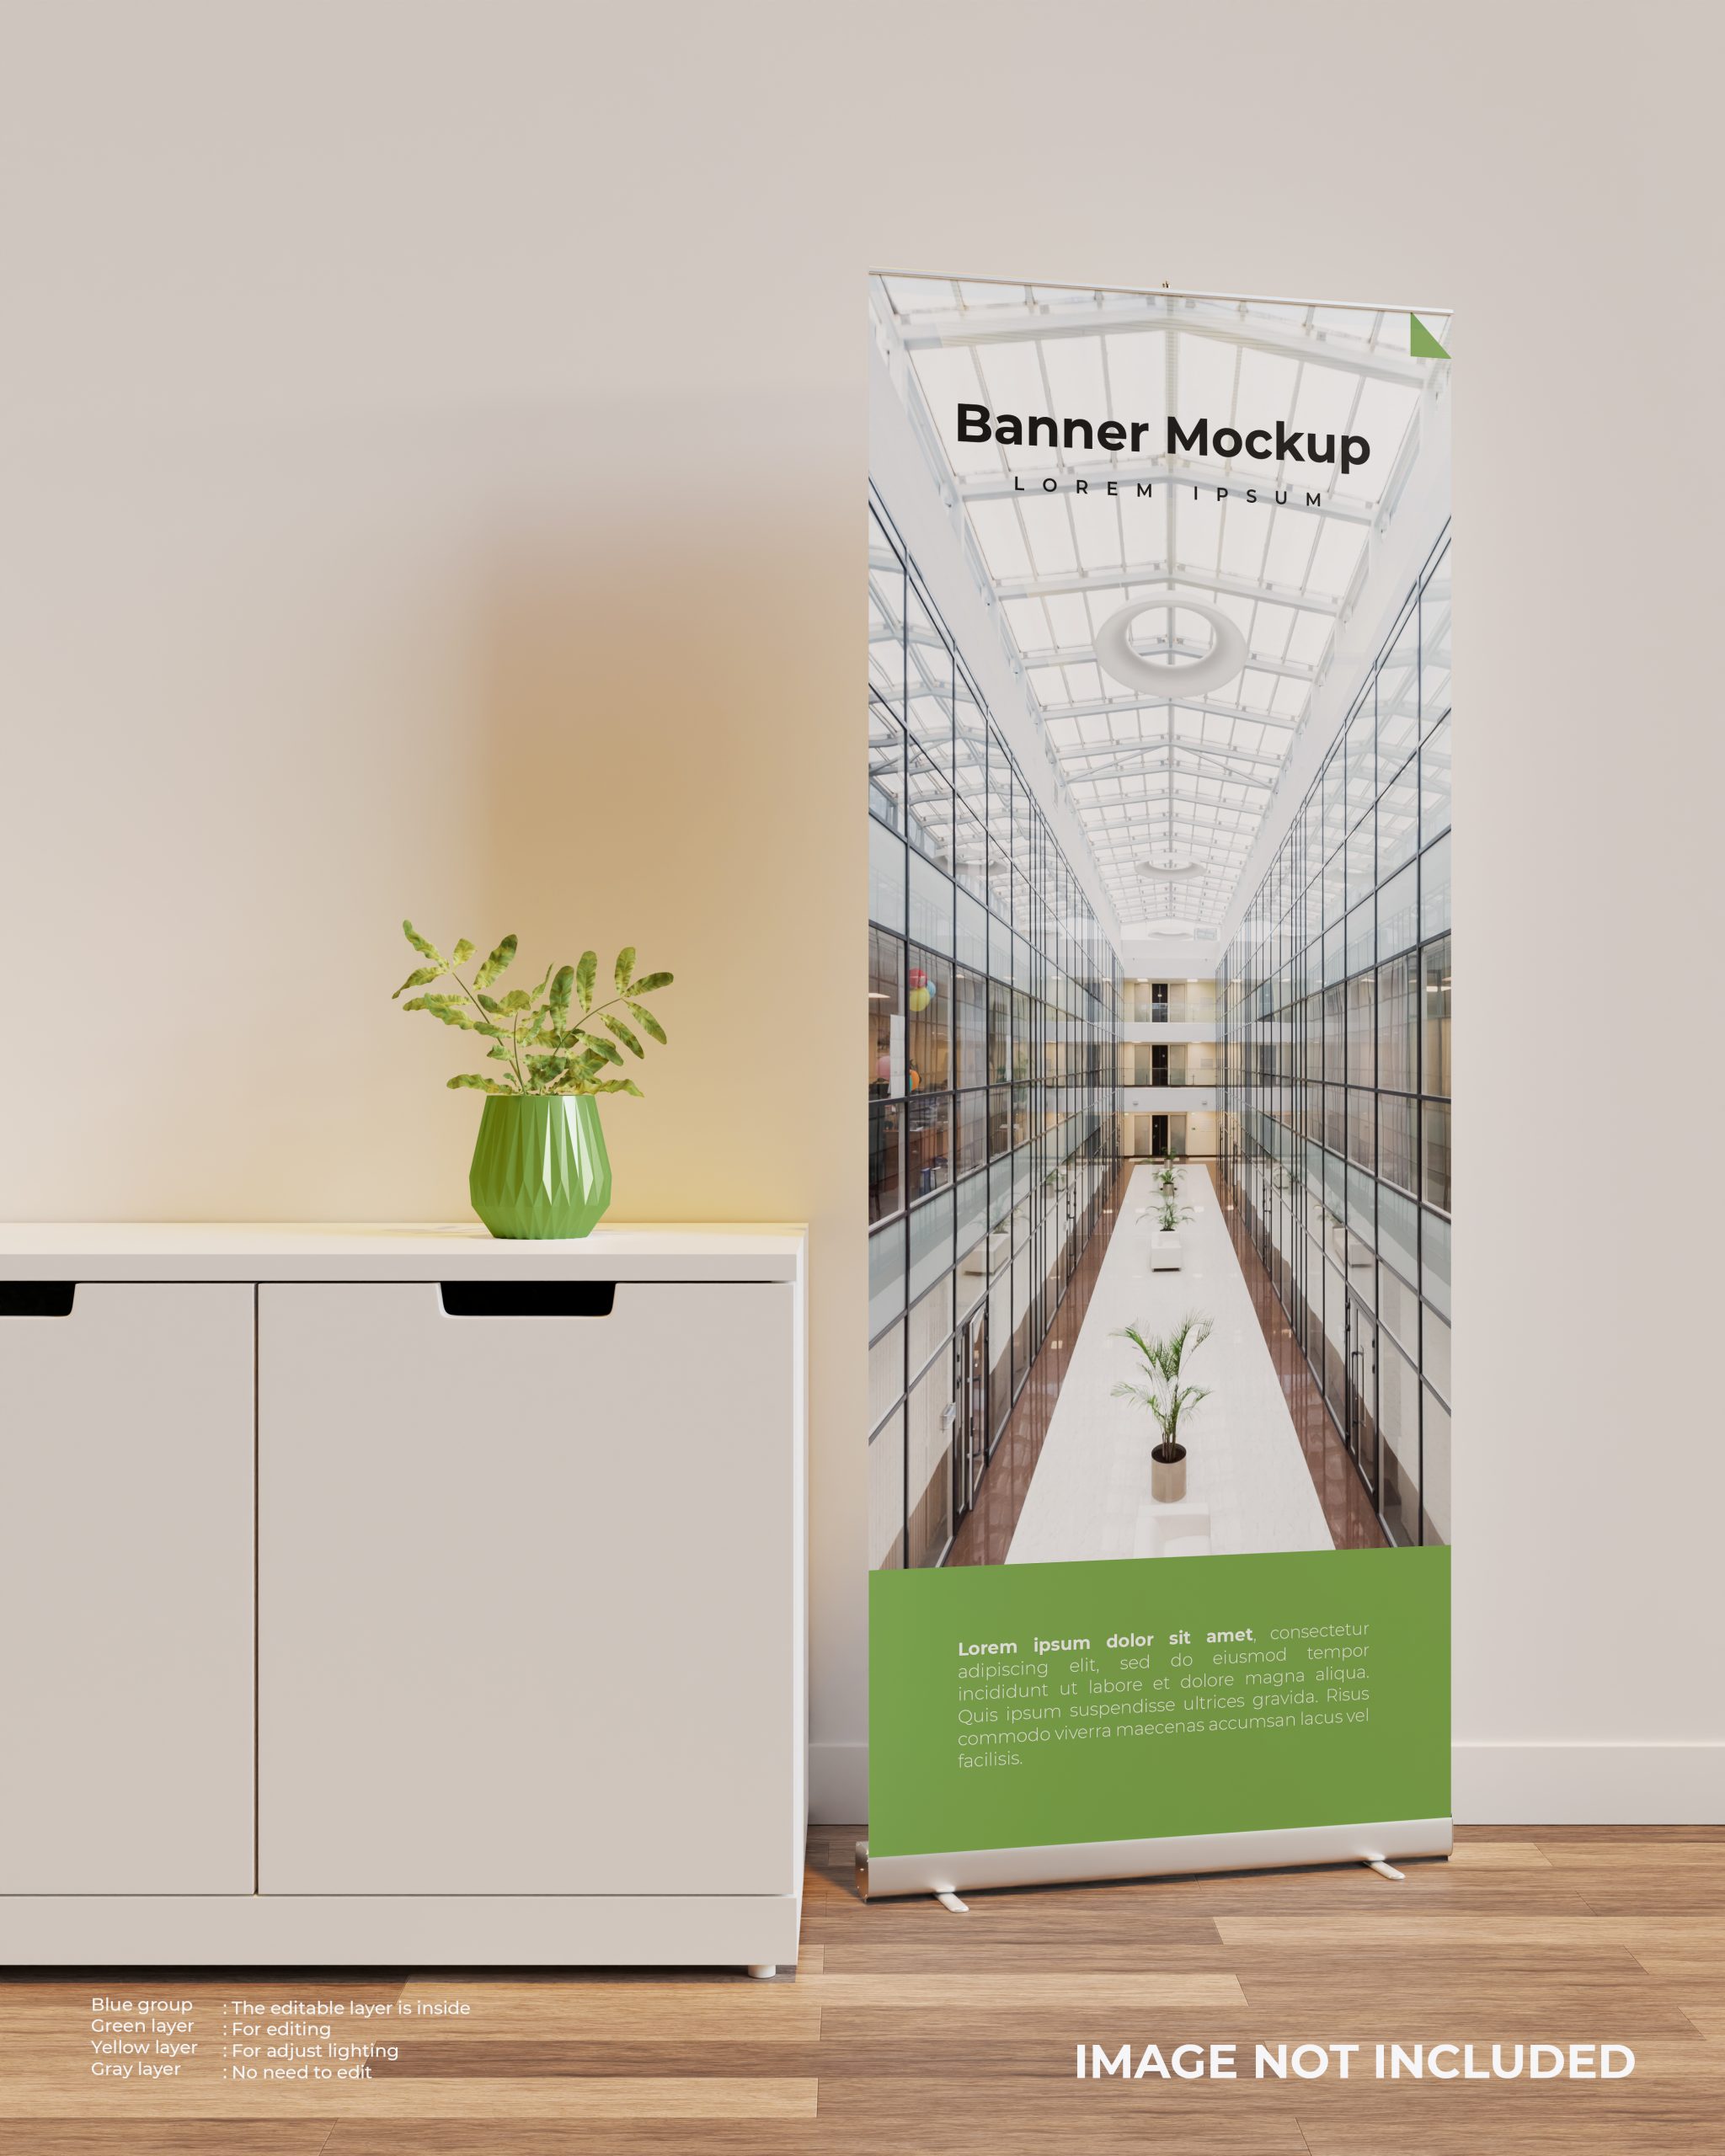 Roll up banner mockup in interior scene next to the cupboard